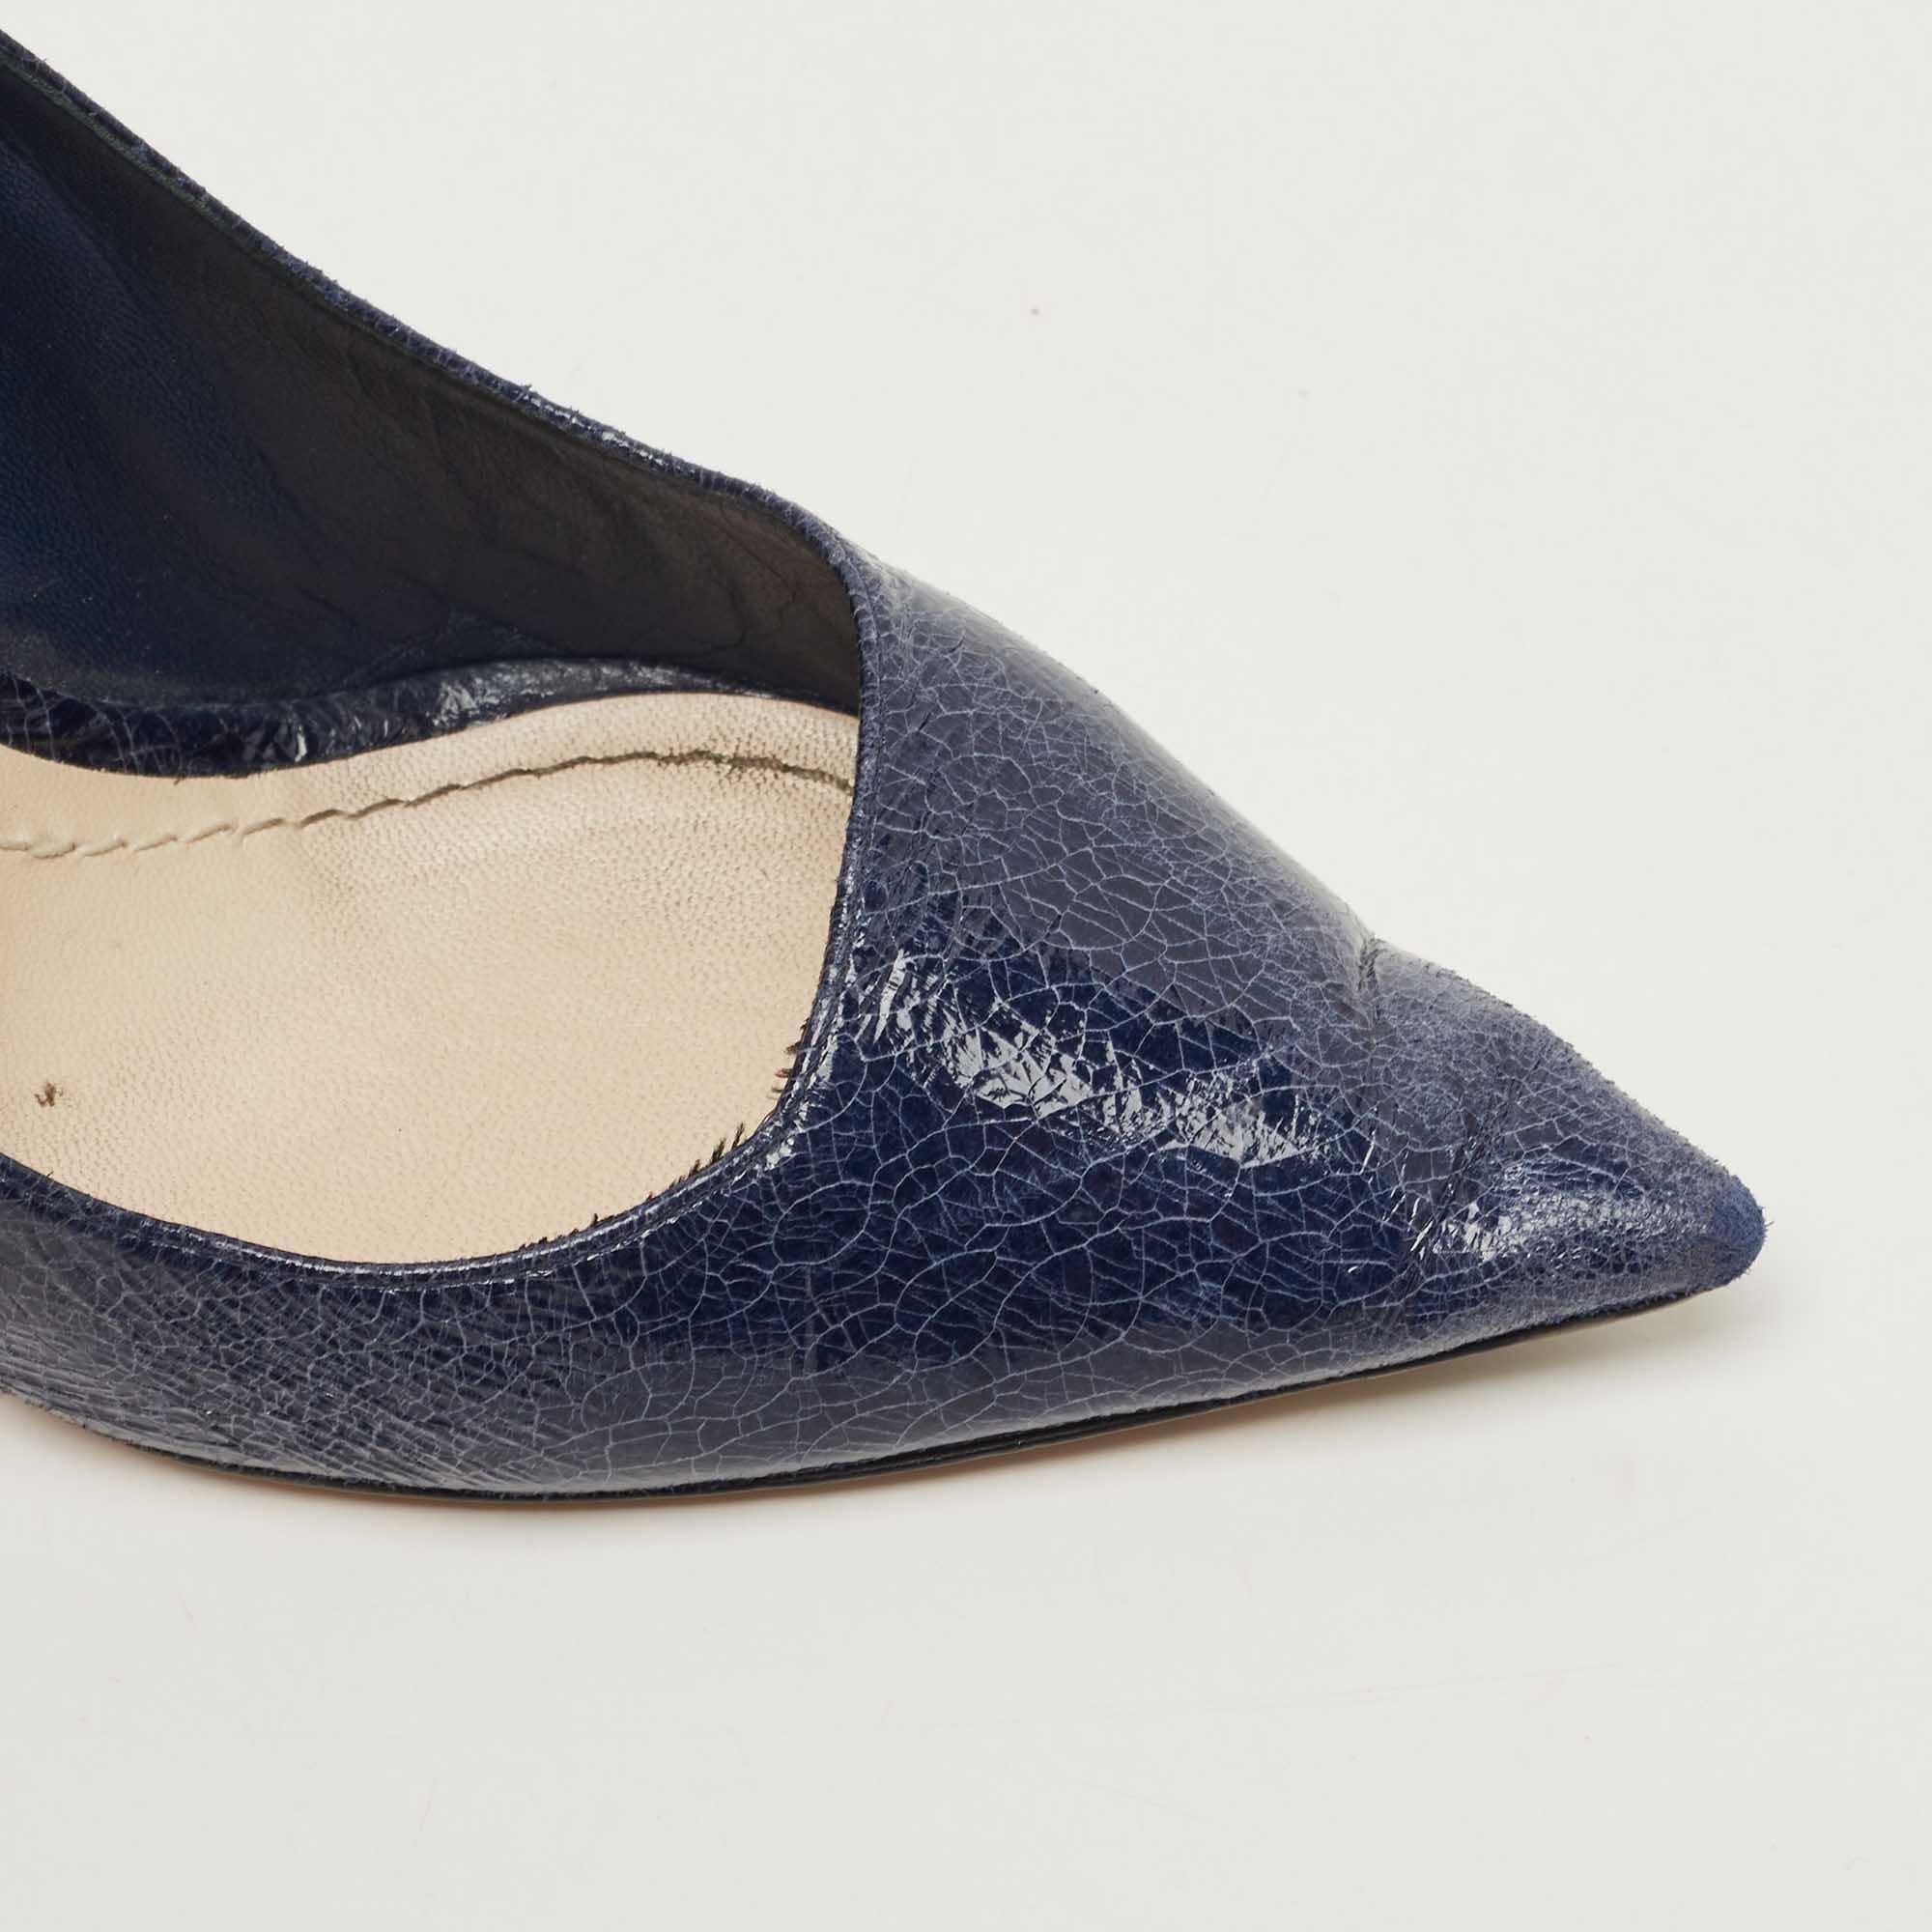 Dior Navy Blue Texture Leather Songe Pumps Size 38.5 2